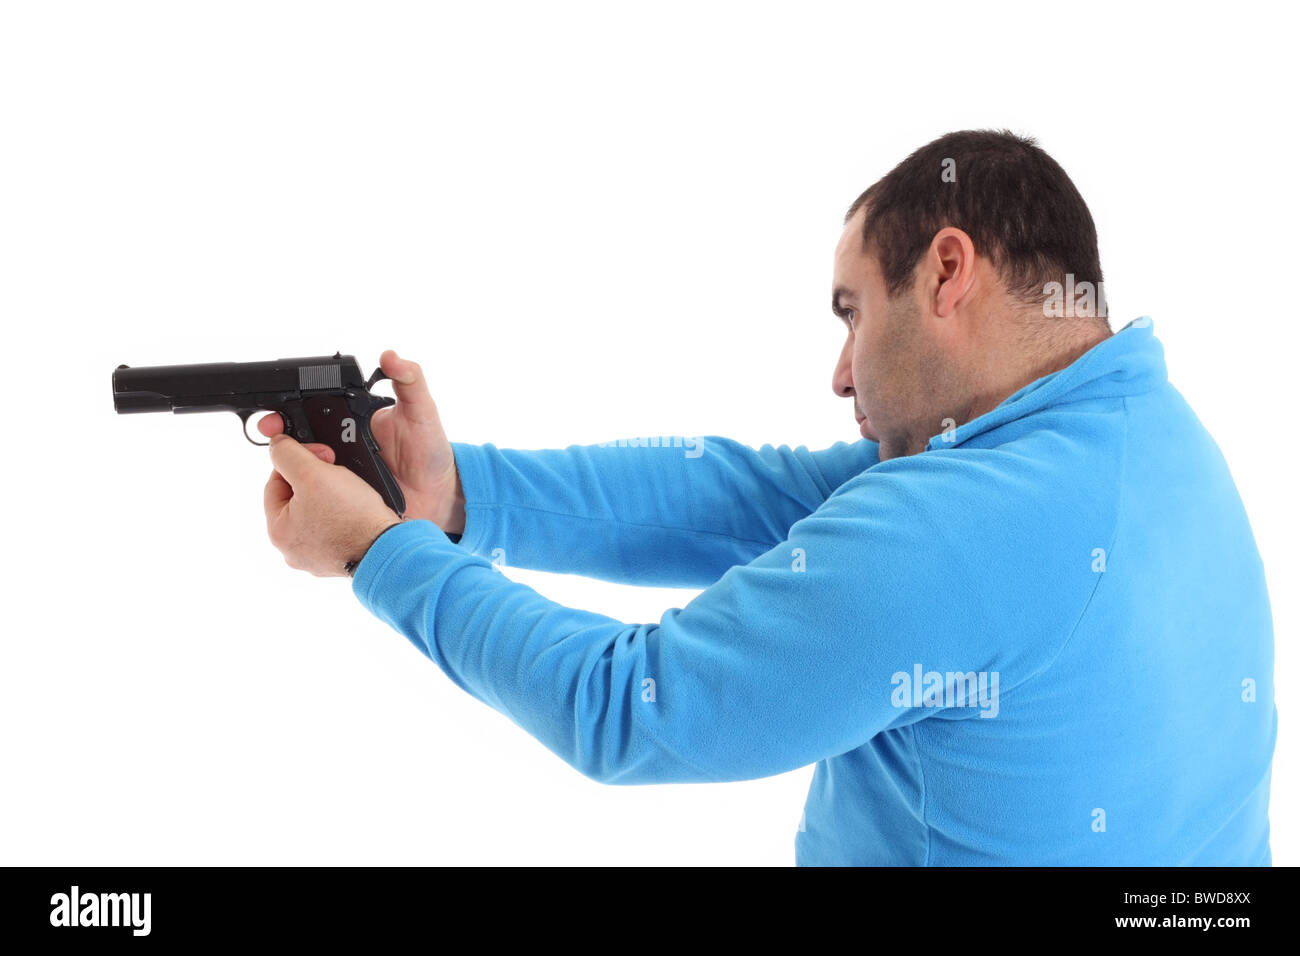 Image of a cop with a pistol Stock Photo